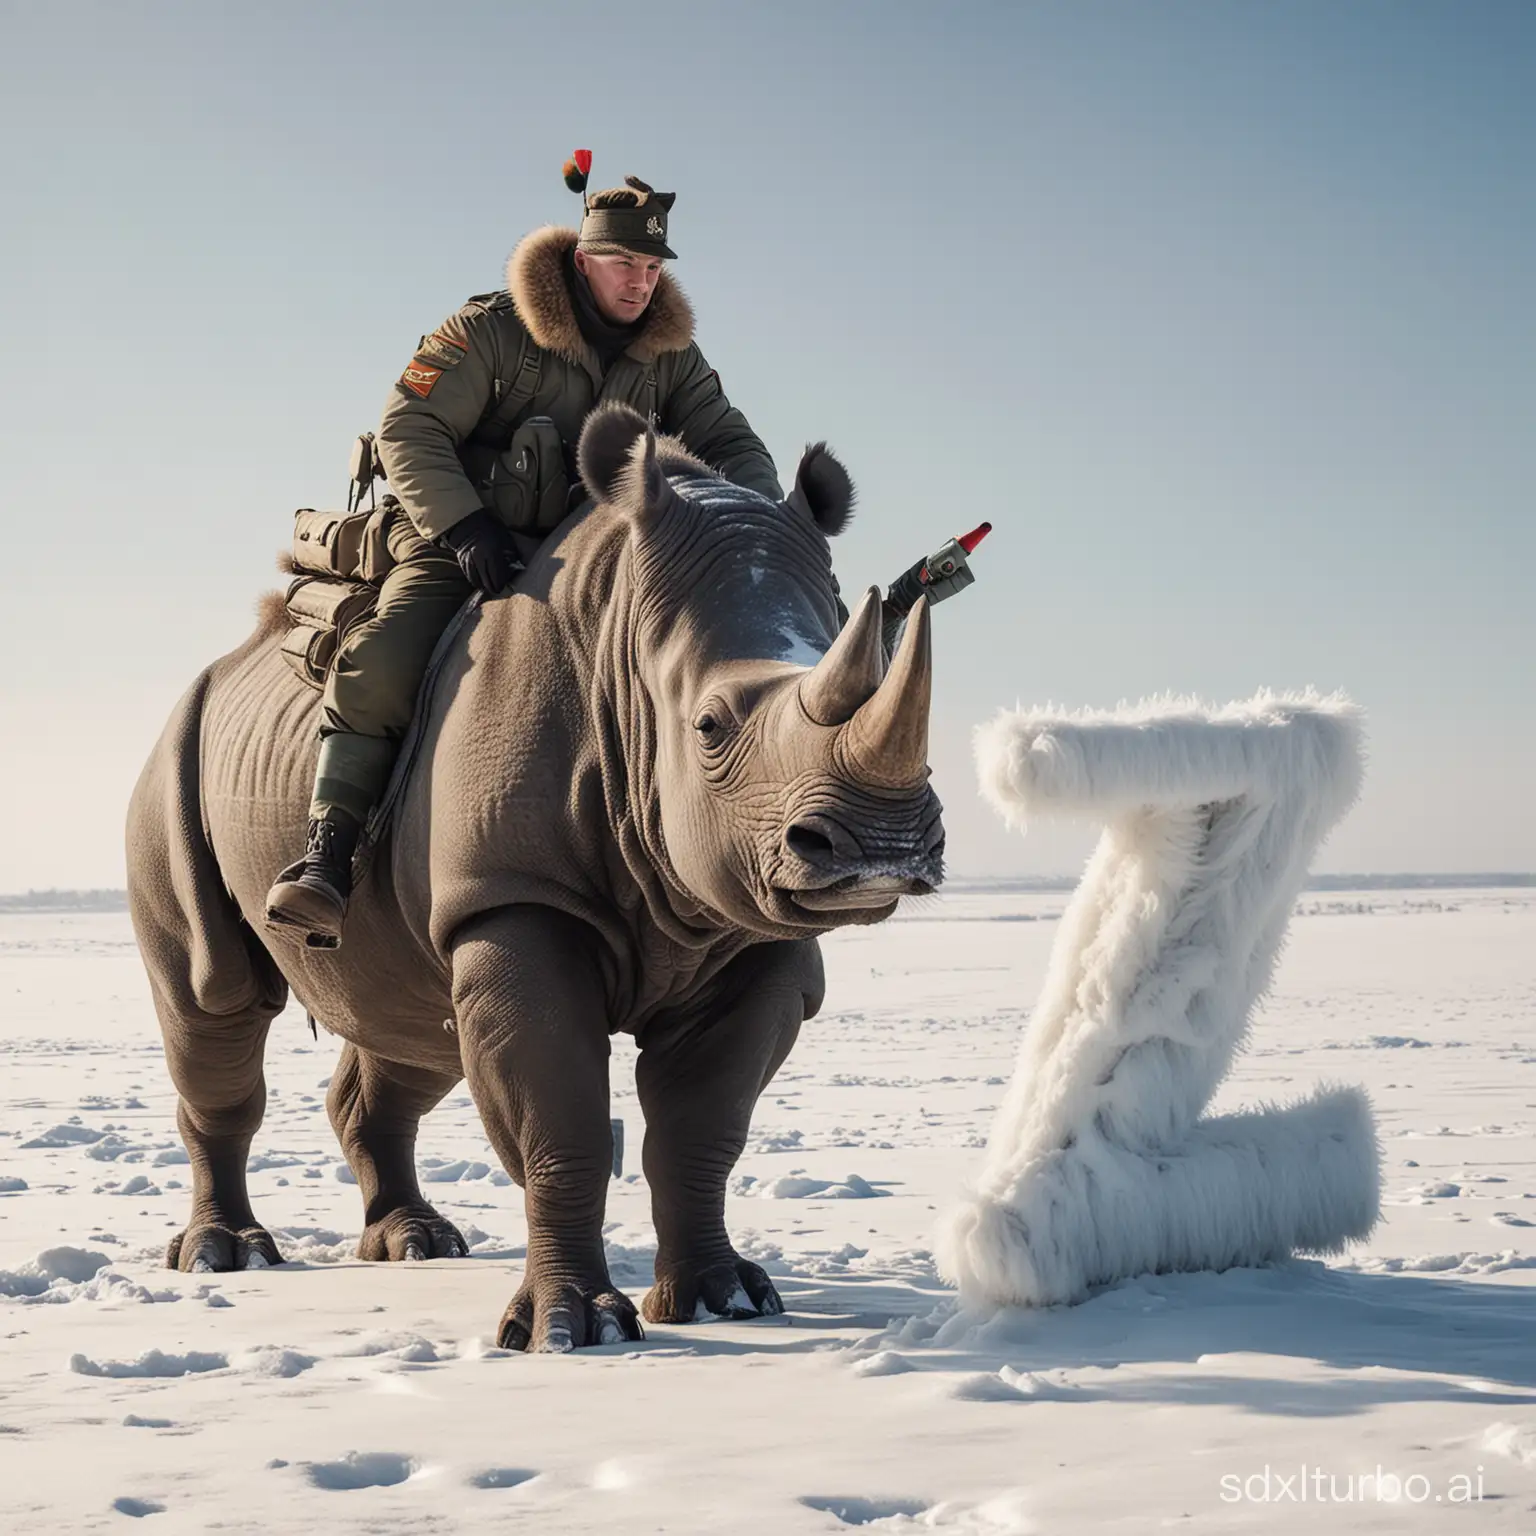 Russian-Soldier-Riding-Hairy-Rhinoceros-with-Letter-Z-Winter-Scene